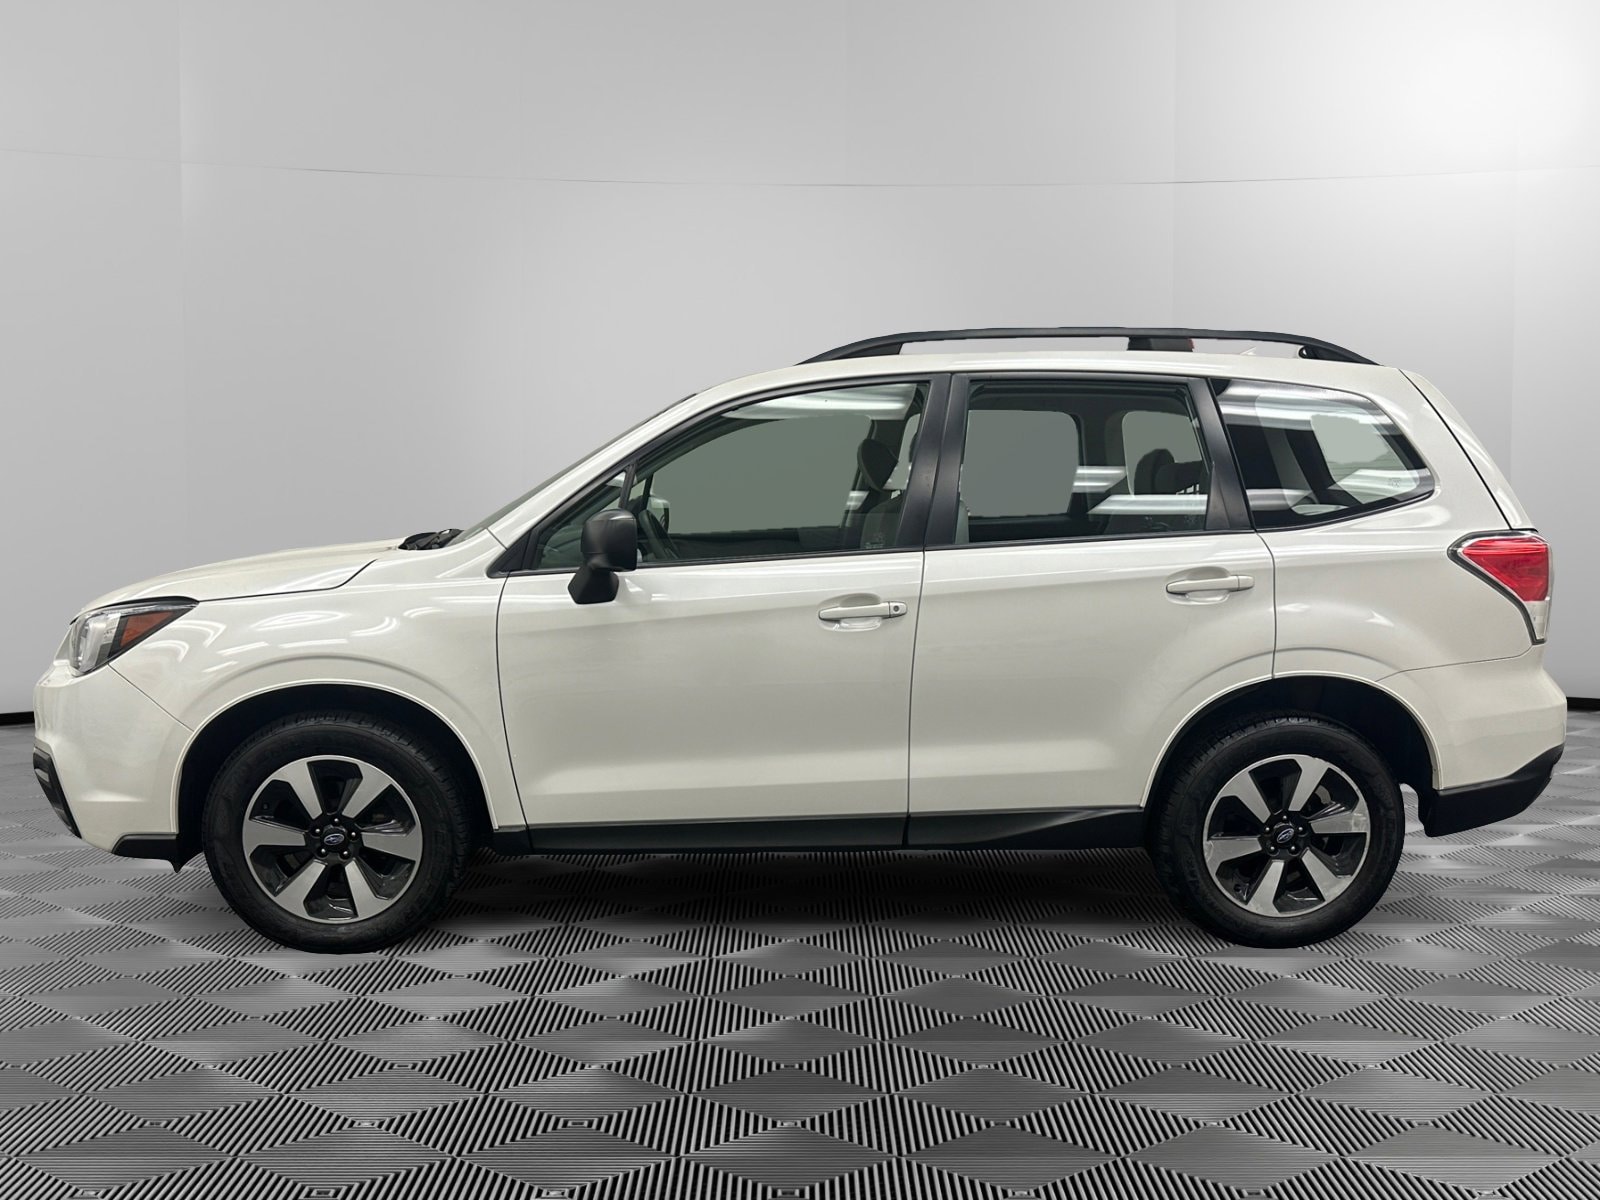 Used 2018 Subaru Forester  with VIN JF2SJABC4JH451911 for sale in Cortlandt Manor, NY